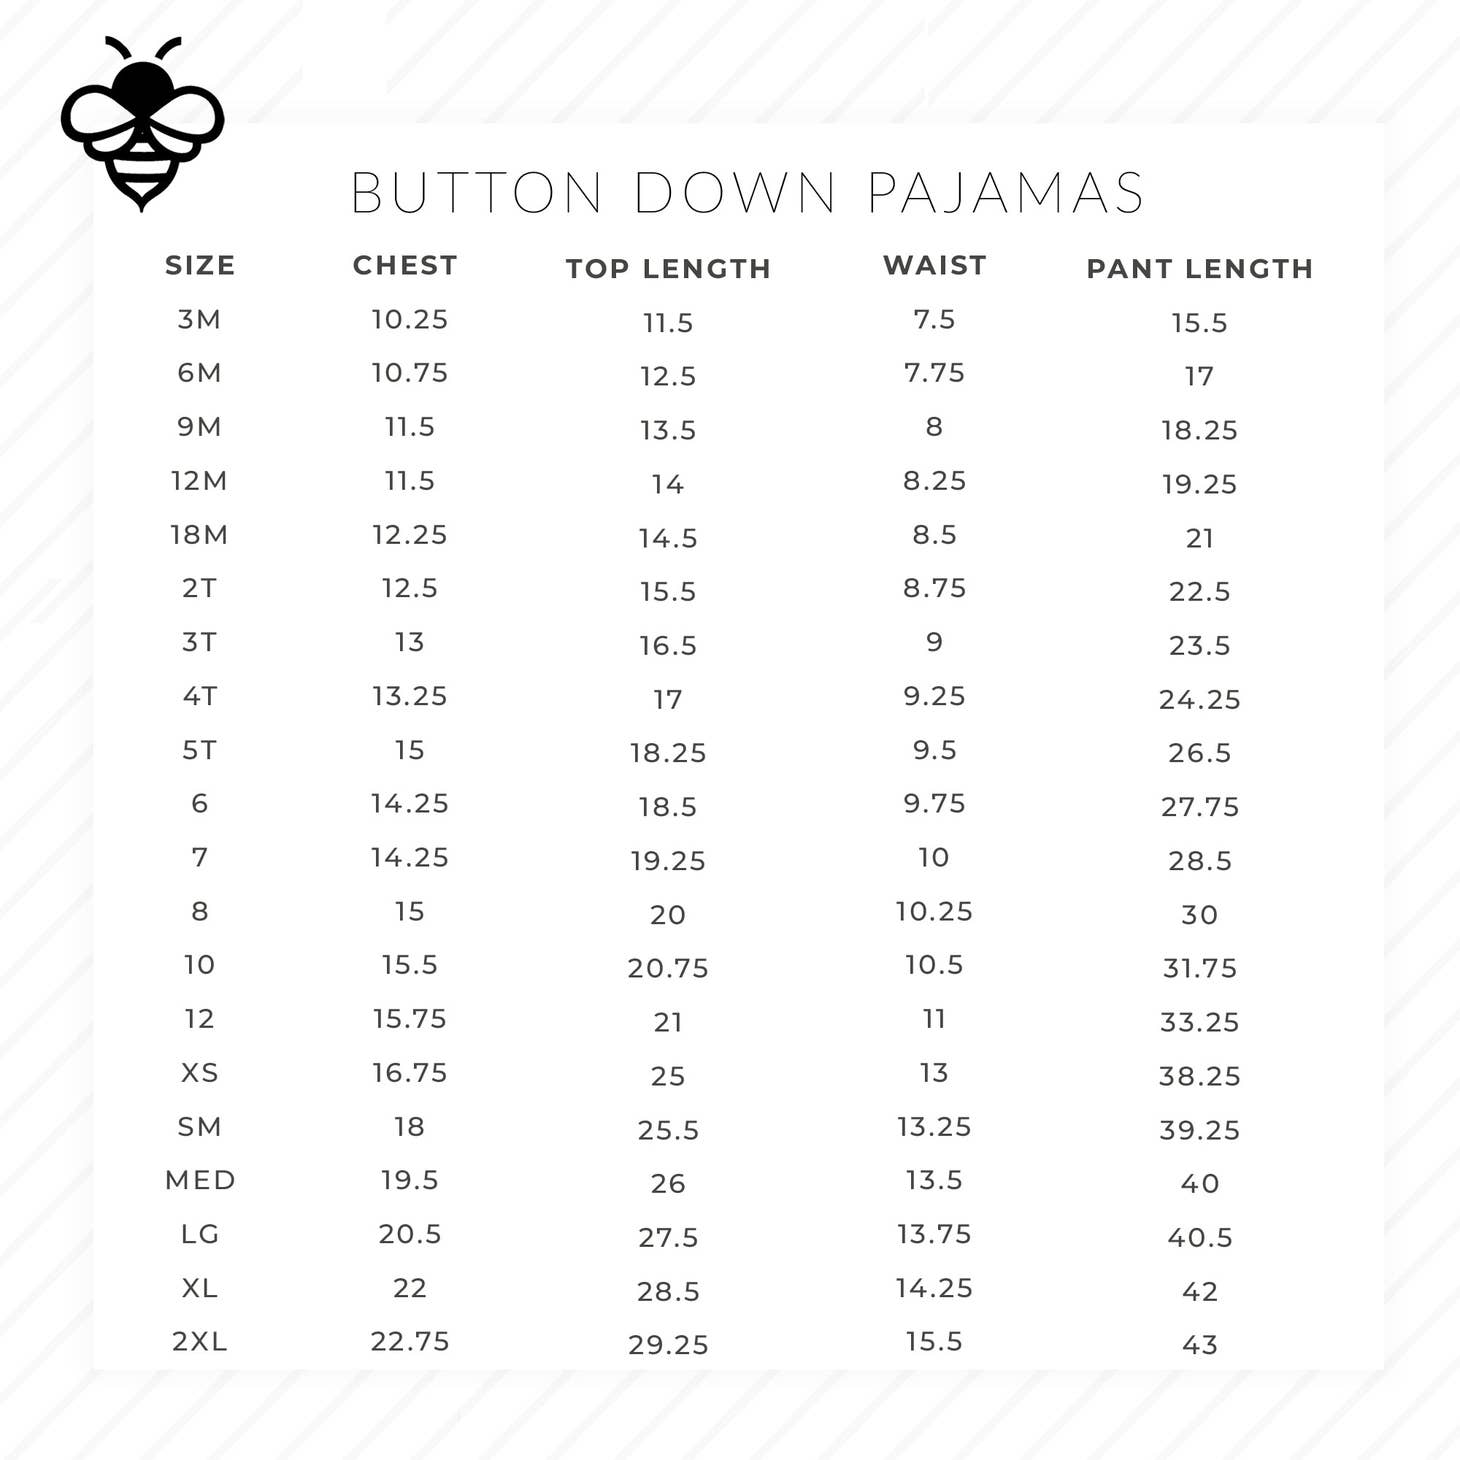 The size chart for the Sugar Bee Clothing Crawfish Button Down Pajamas.